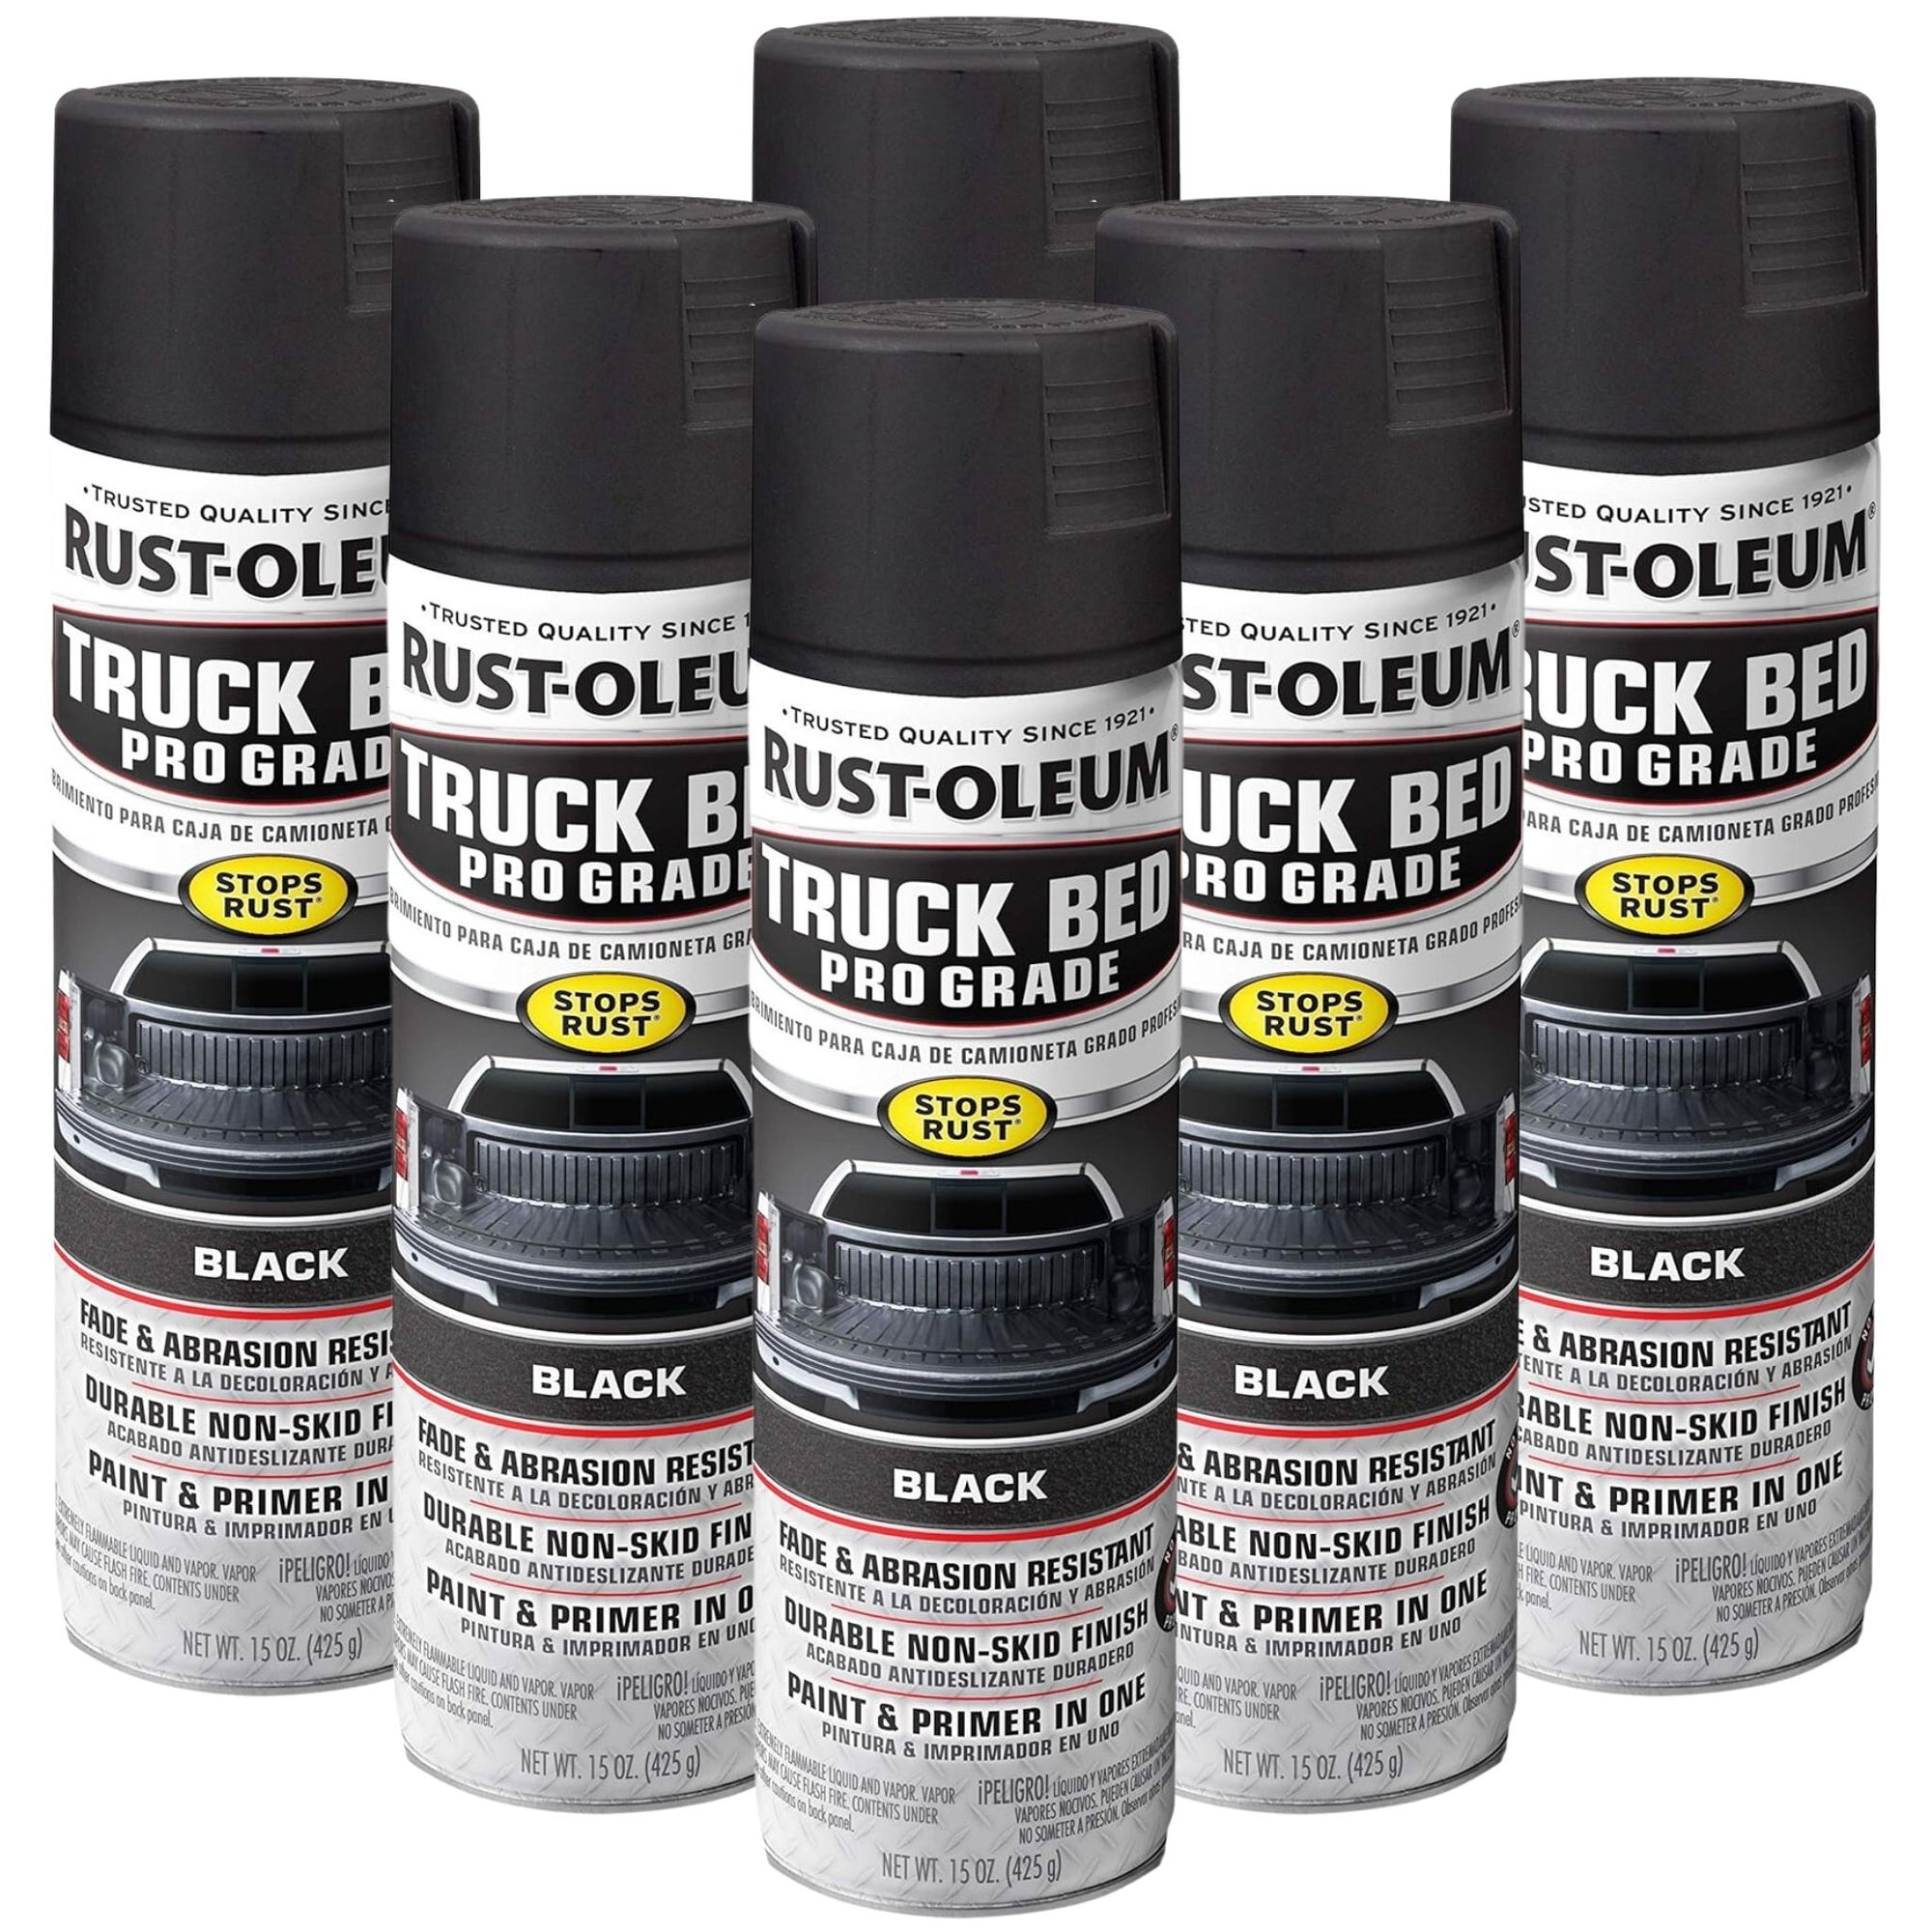 Rust-Oleum 27241 Truck Bed Pro Grade , Black - 425g - South East Clearance Centre